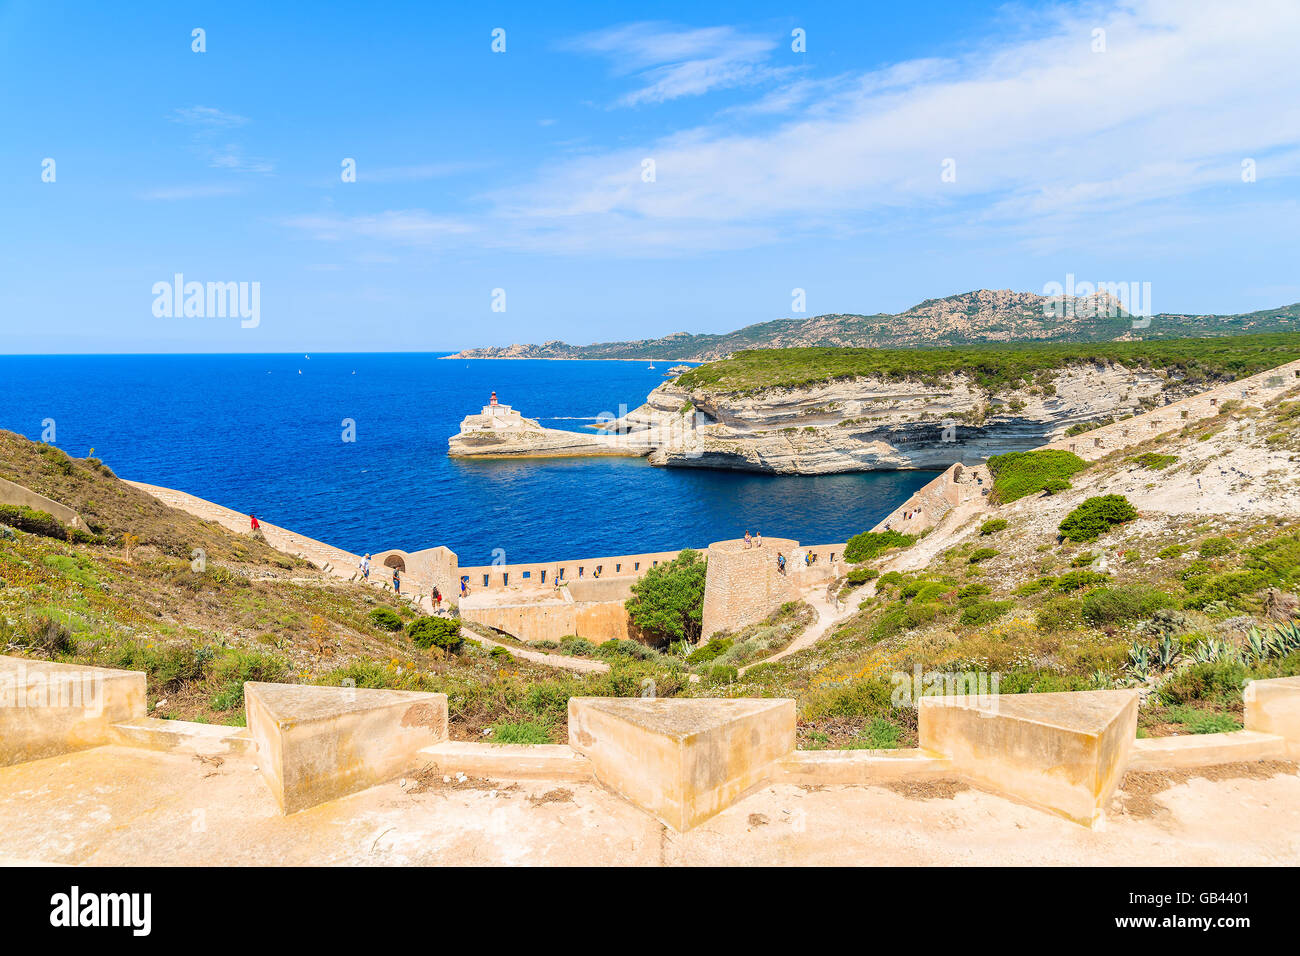 View of sea from fortress walls of Bonifacio town, Corsica island, France Stock Photo